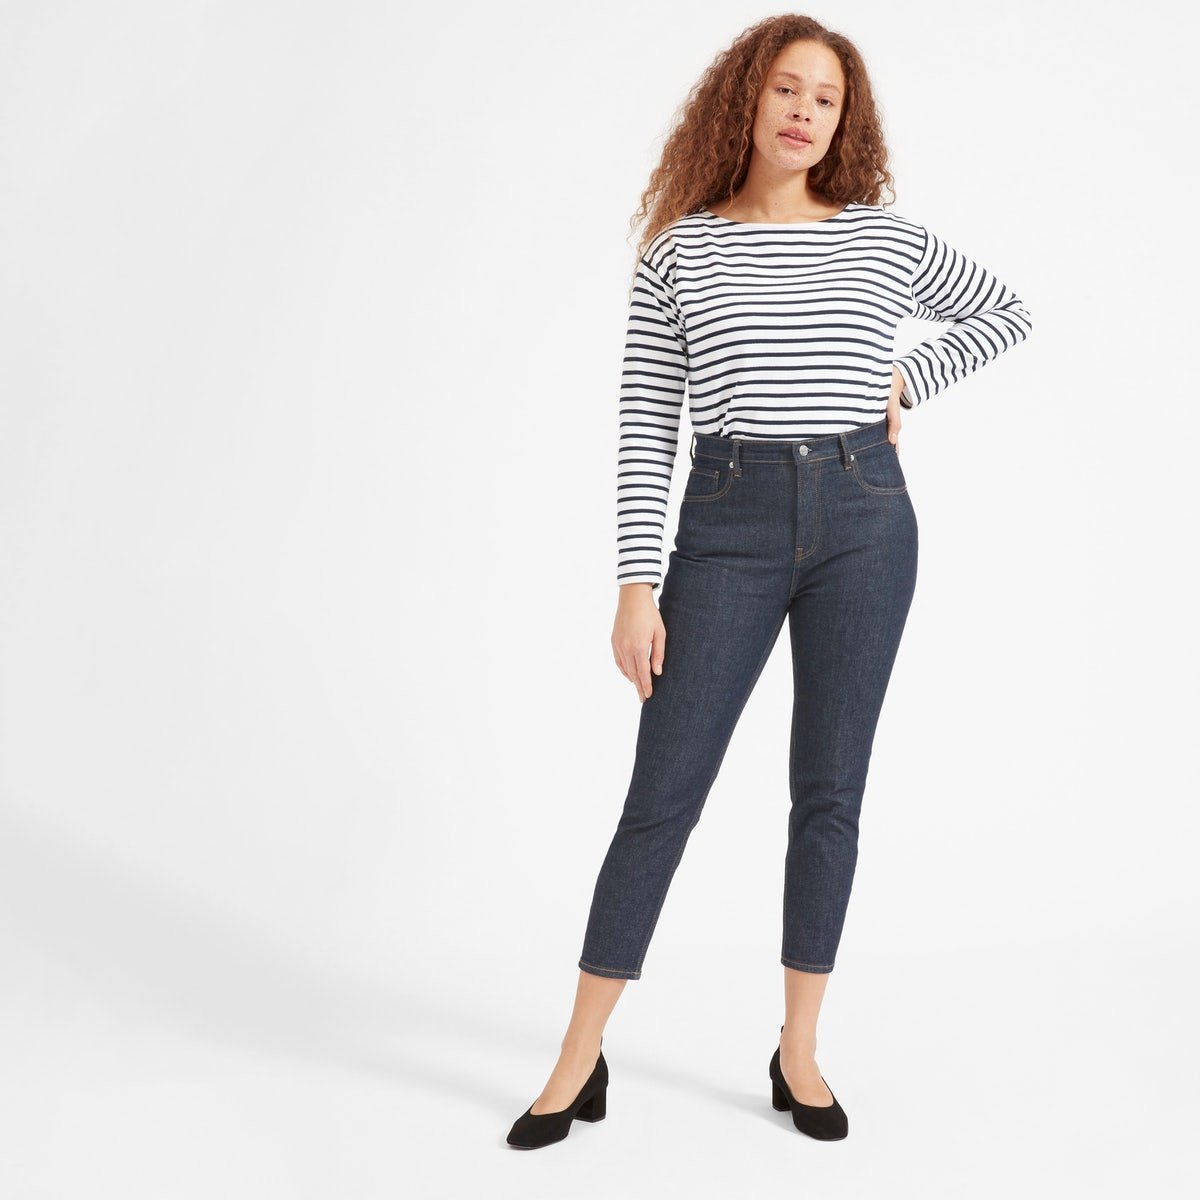 high rise jeans body type